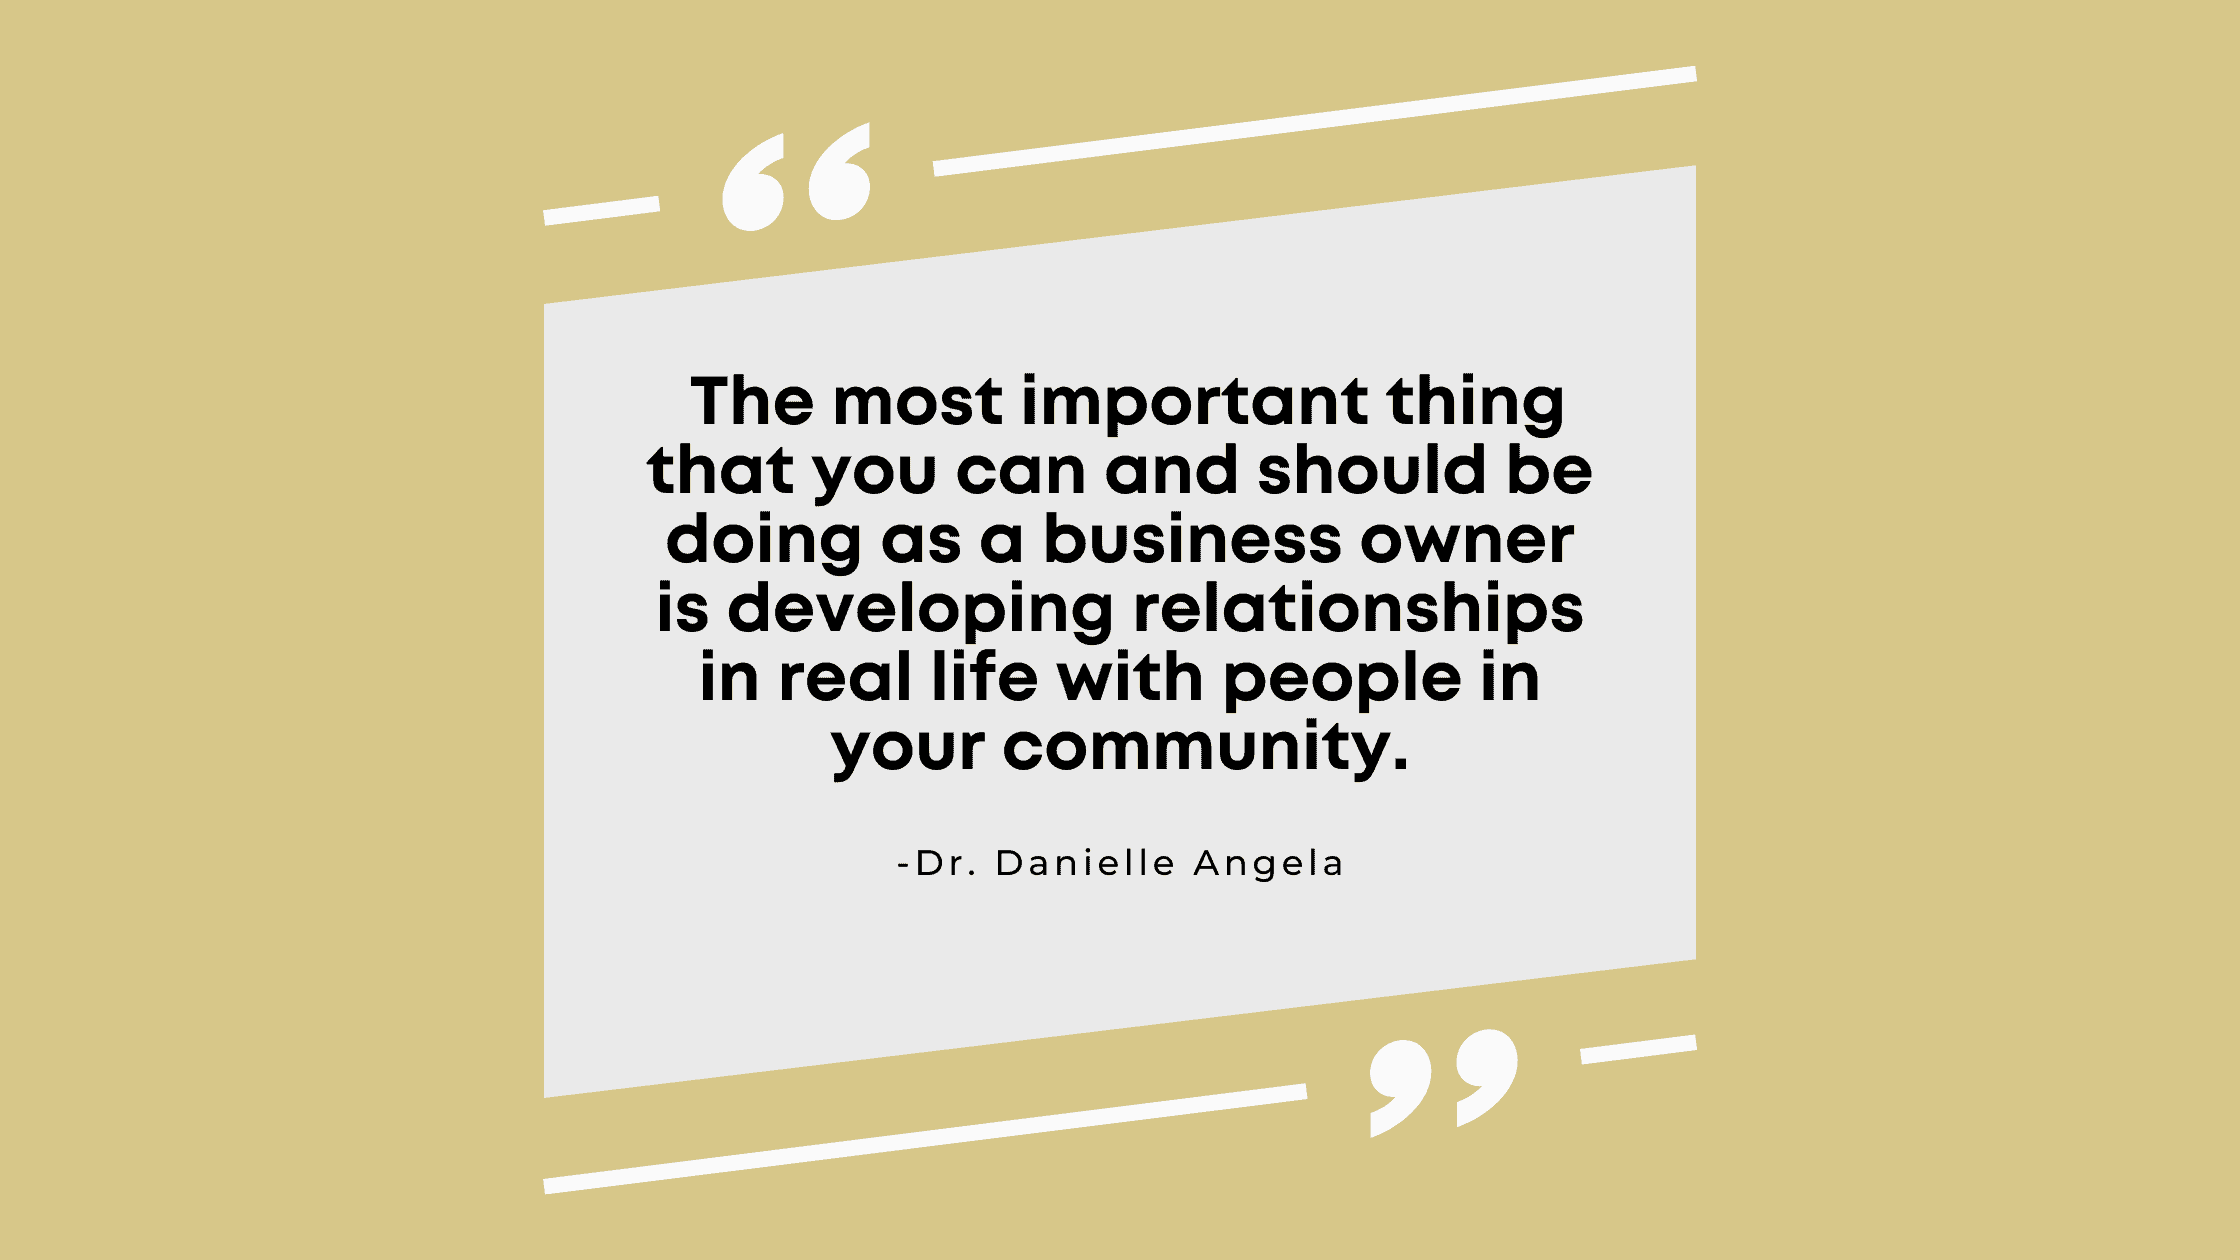  The most important thing that you can and should be doing as a business owner is developing relationships in real life with people in your community.